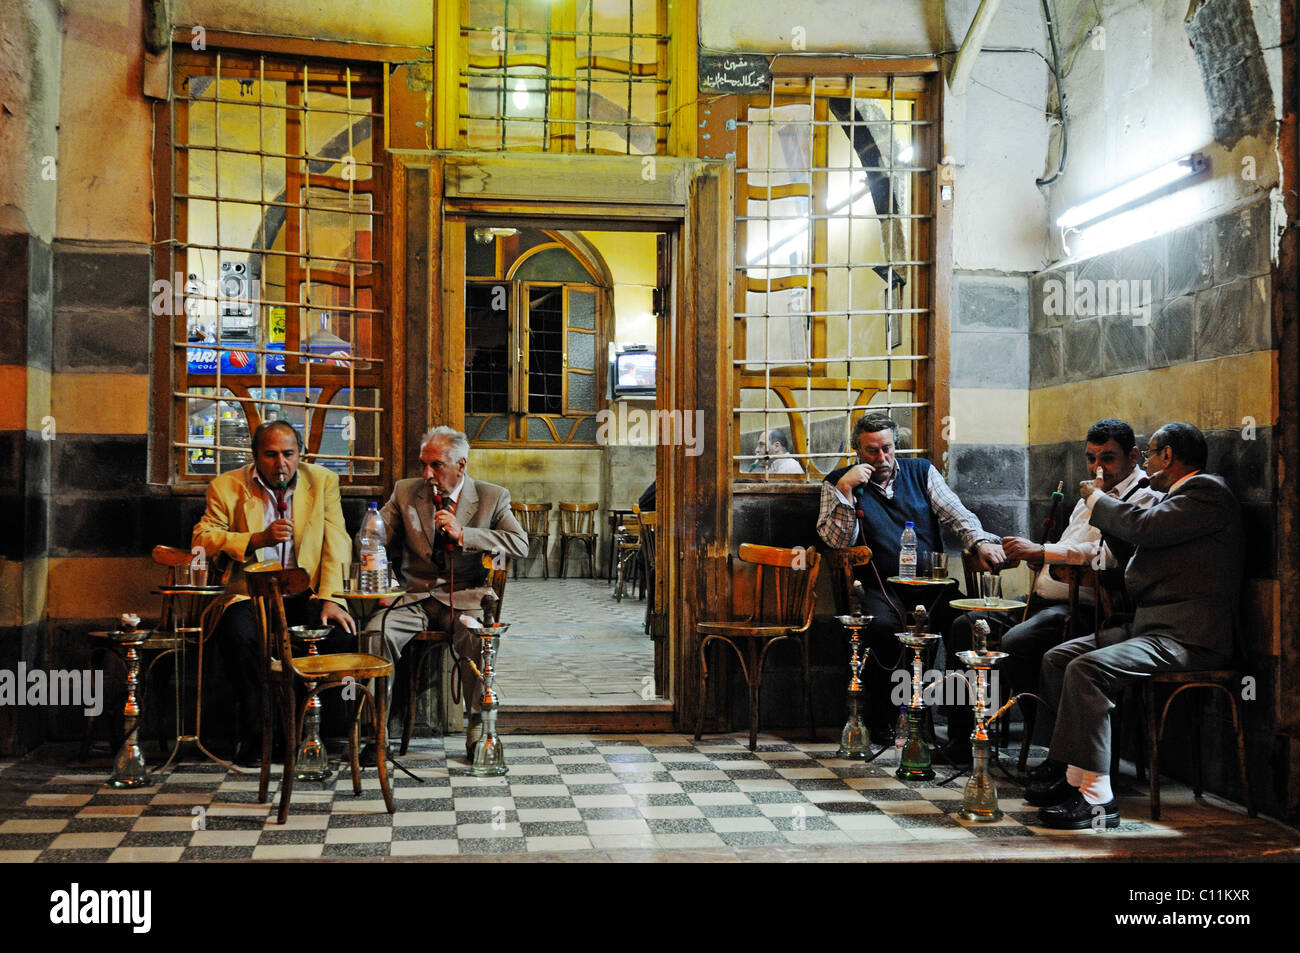 Men smoking a hookah in a cafe in the historic centre, bazaar of Damascus, Syria, Middle East, Asia Stock Photo